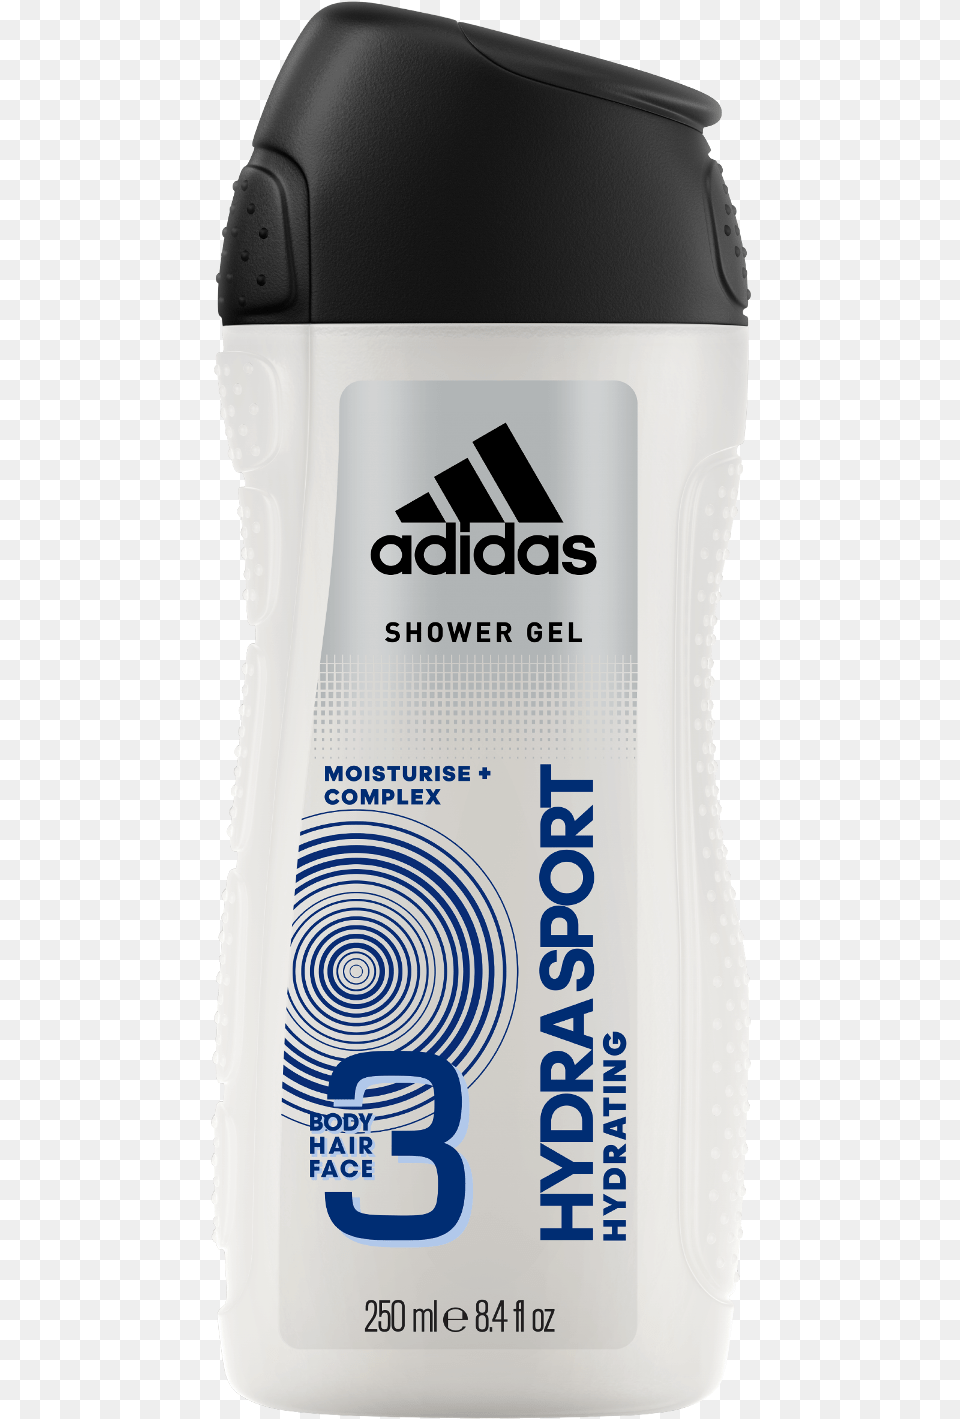 Hydra Sport 3in1 Body Hair And Face Shower Gel For Adidas Active Start Shower Gel, Bottle, Cosmetics, Deodorant, Can Free Png